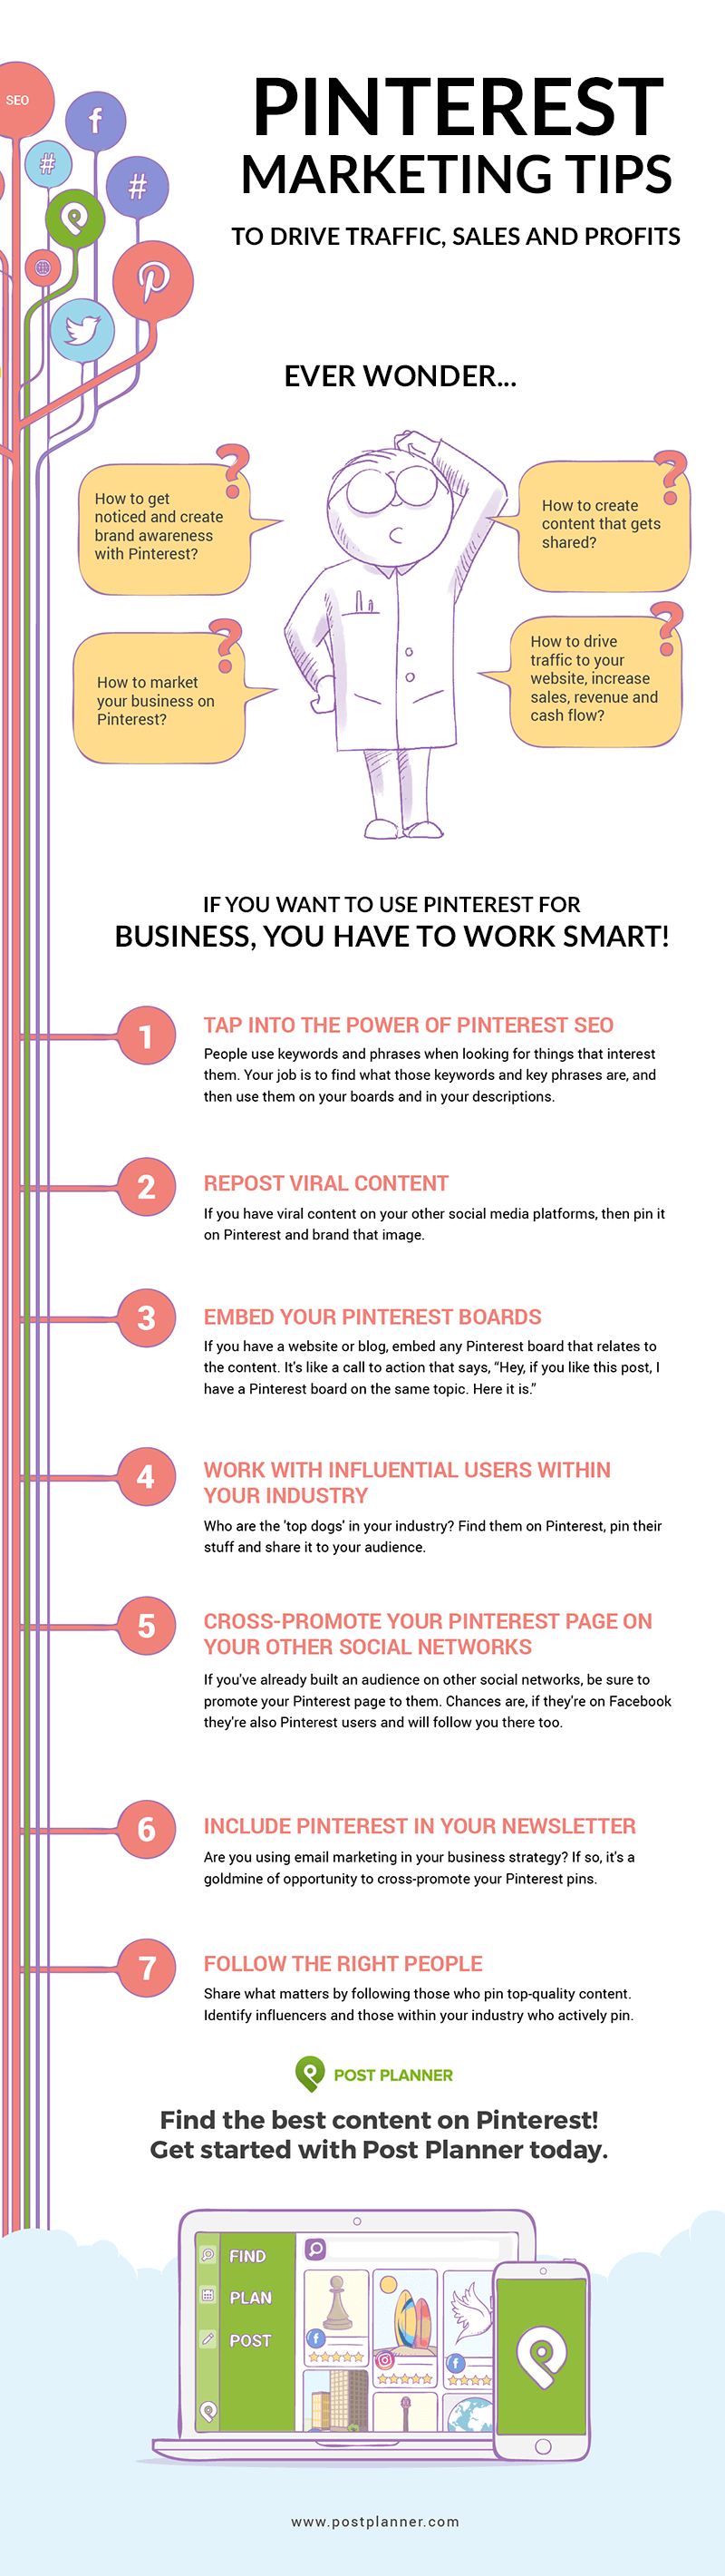 Pinterest Hacks to Drive Traffic, Sales and Profits infographic-01 (1)